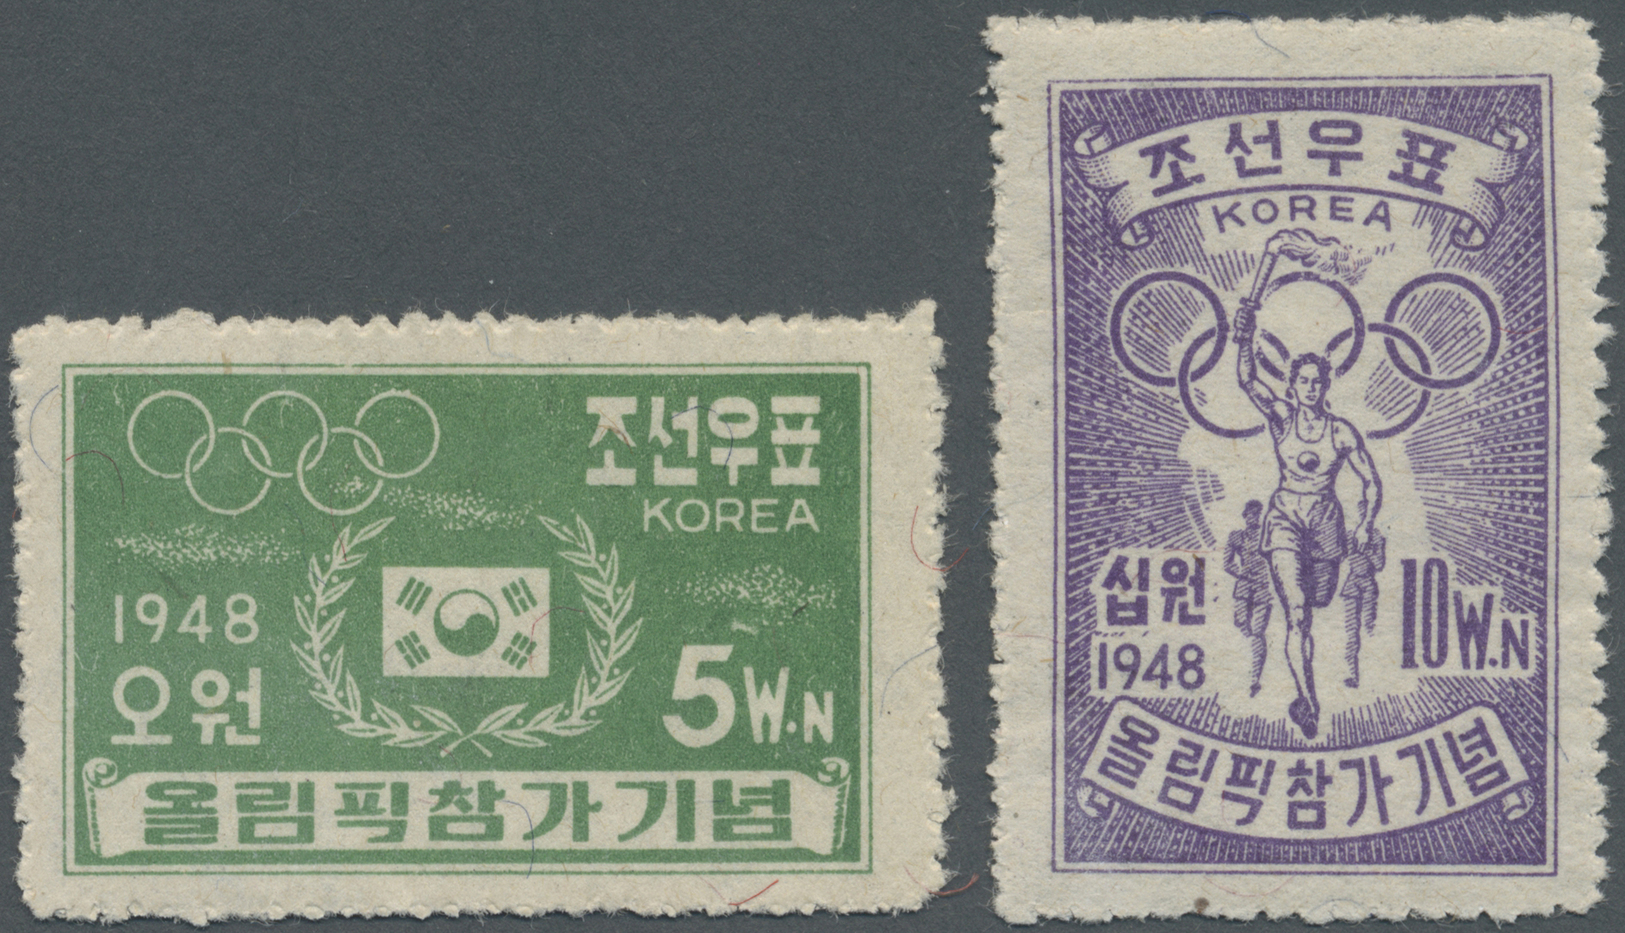 ** Korea-Süd: 1948, 5 And 10 Won Set To Commemorate The First Participation Of South Korea In The 1948 London Olympic Ga - Korea, South